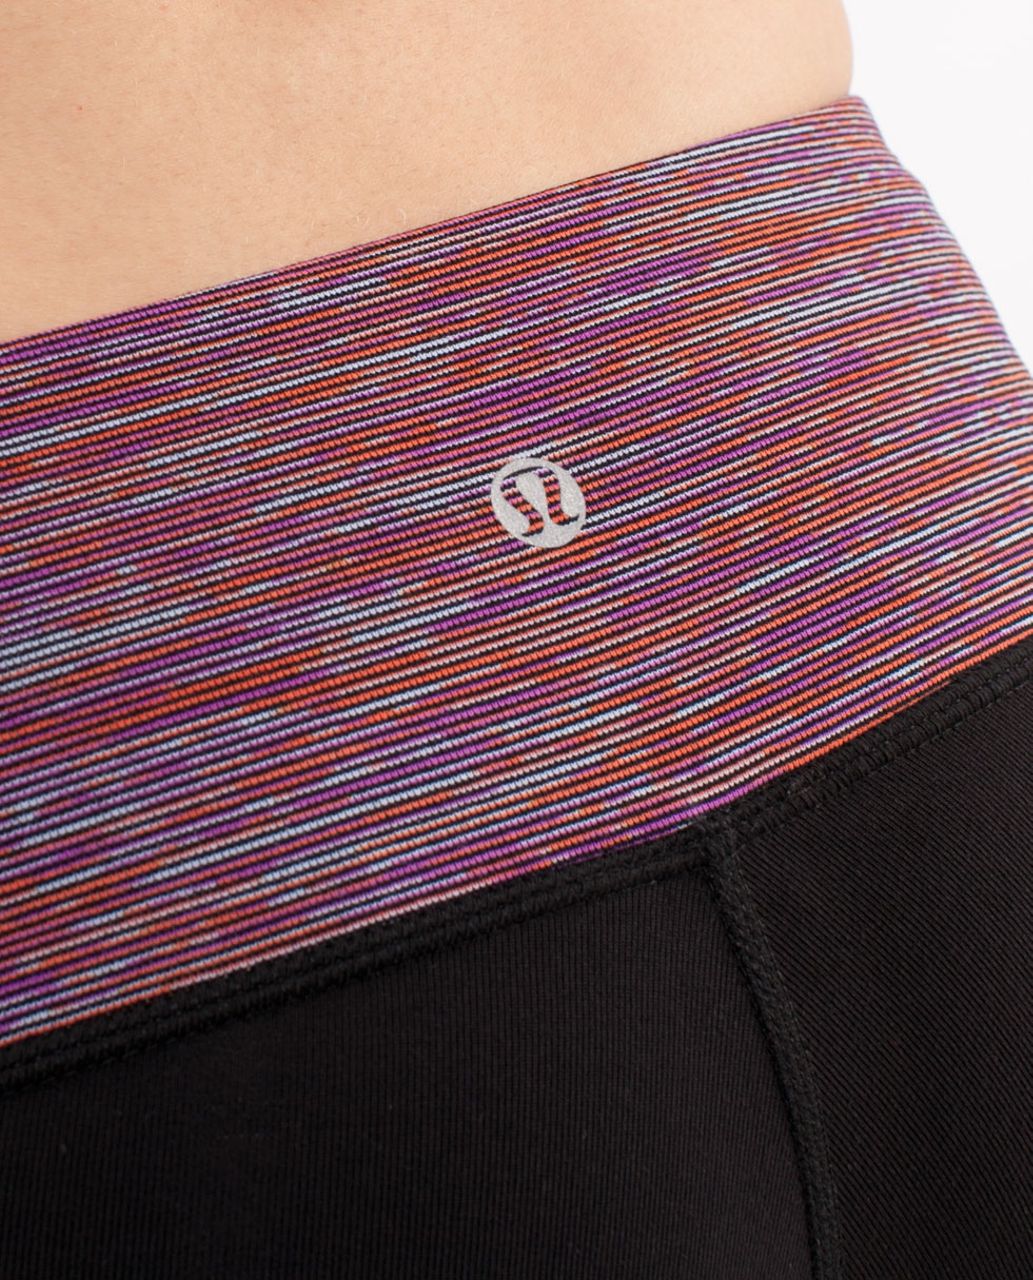 Lululemon Wunder Under Pant - Black /  Wee Are From Space Black March Multi /  Dazzling